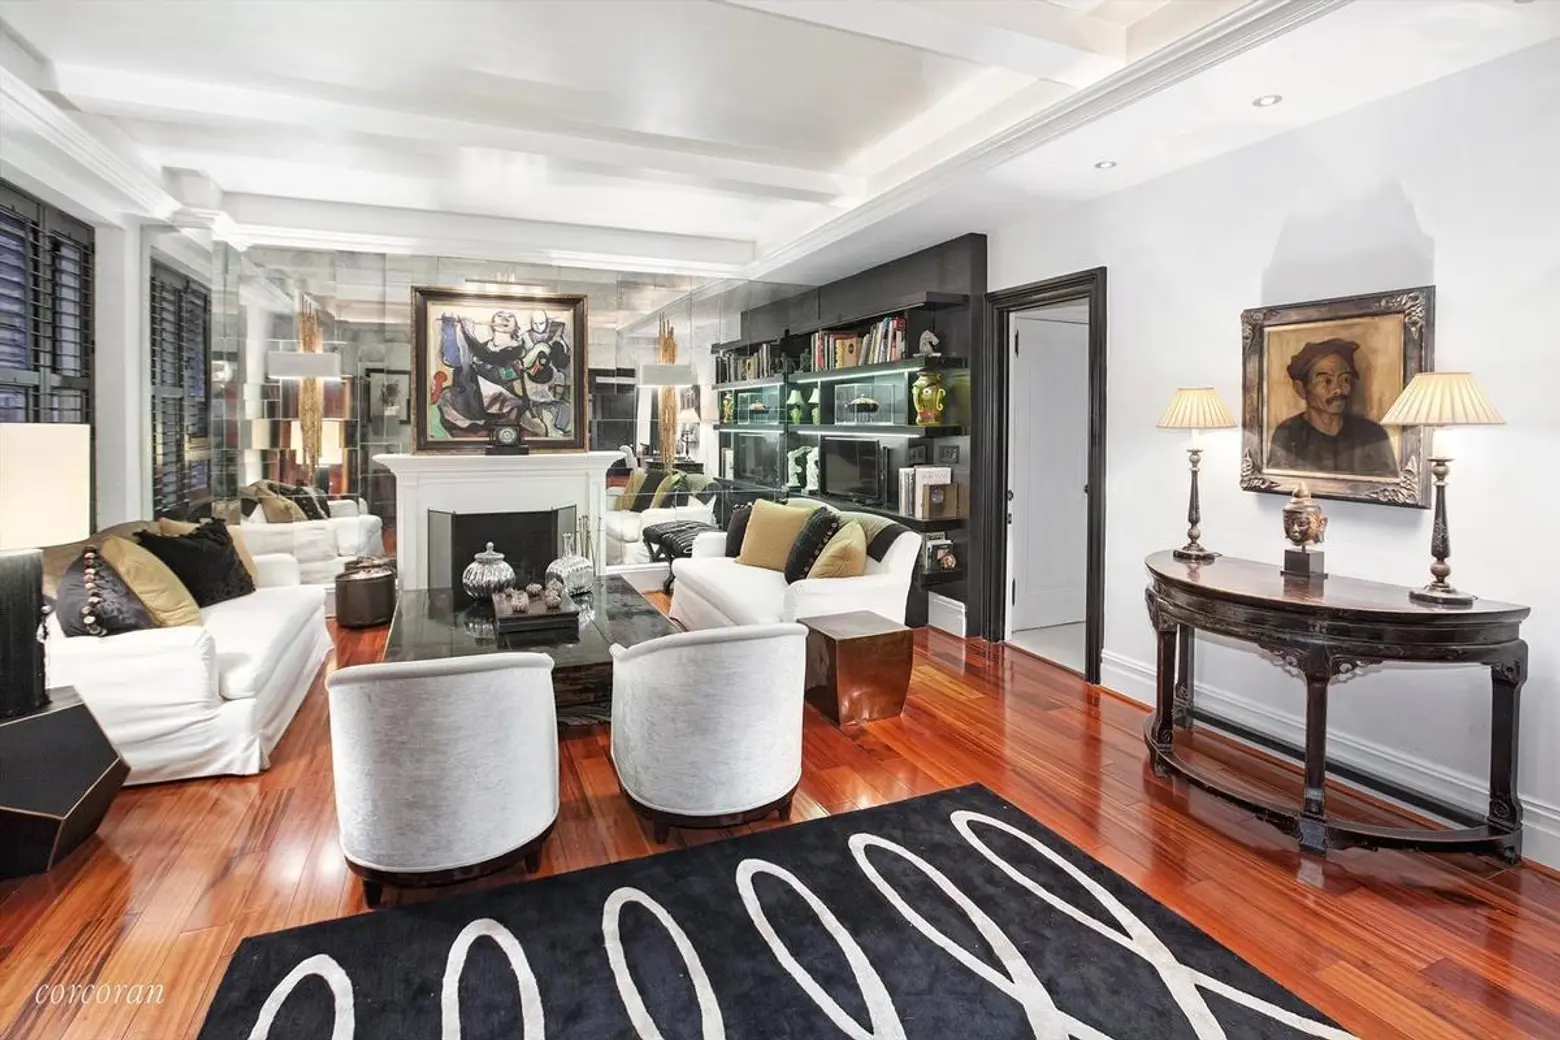 Asking $1.6M, this Murray Hill co-op has a Park Avenue address and old-world Manhattan glamour